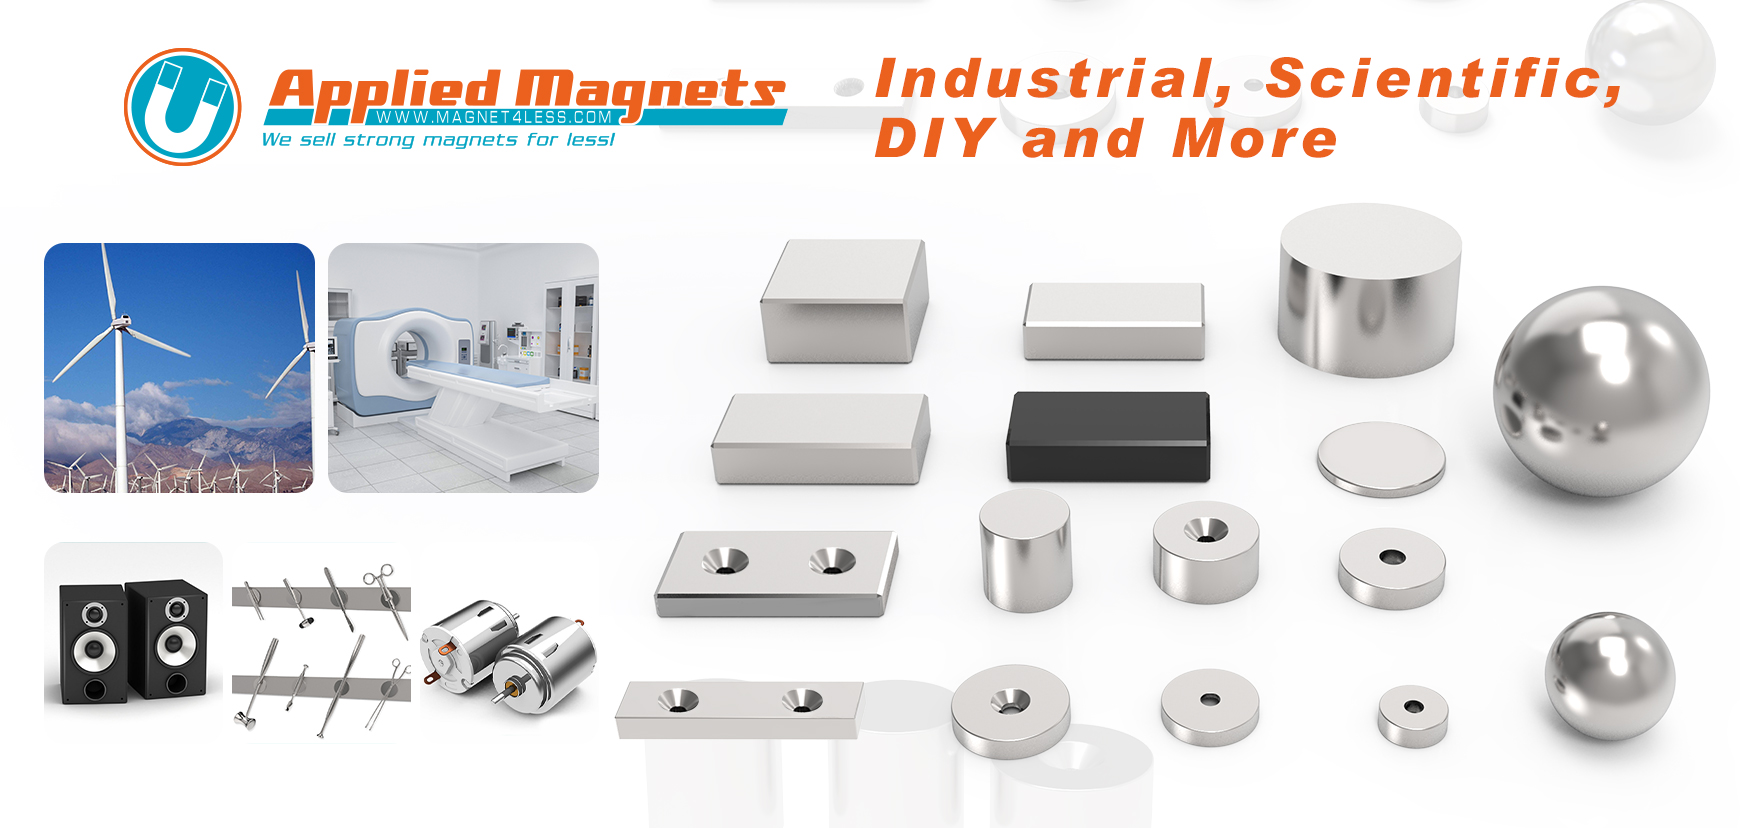 Applied Magnets Is A Distributor Of Magnets For Industry And Home Use